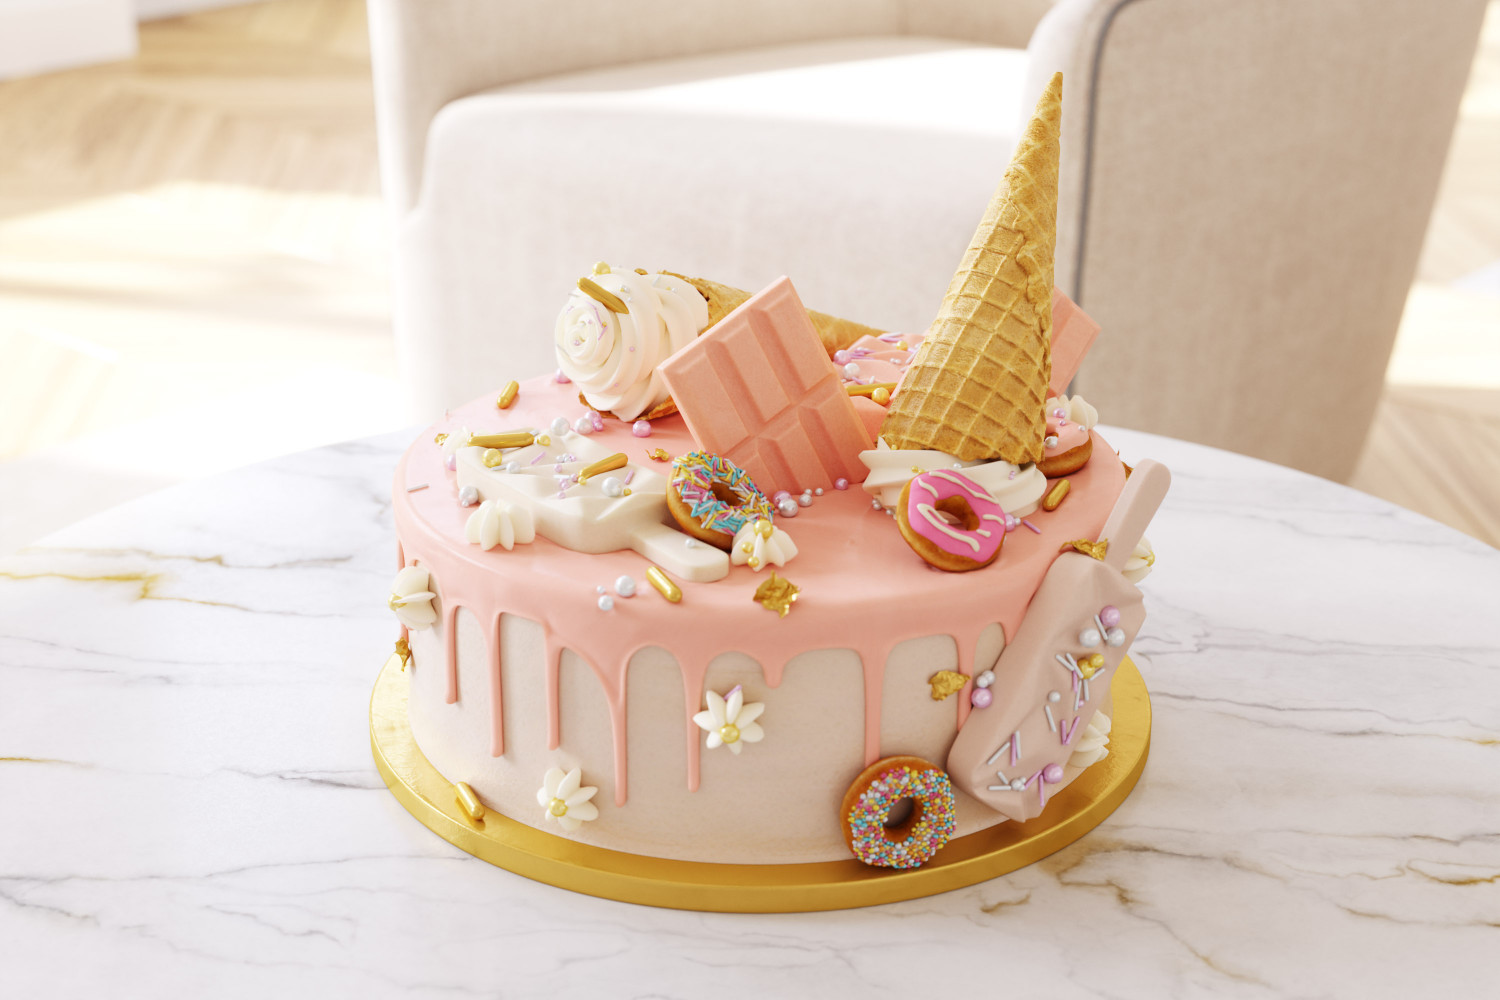 3d Render Of Cake With Cream On The Background Of A Colorful Wall Free  Image and Photograph 198747346.